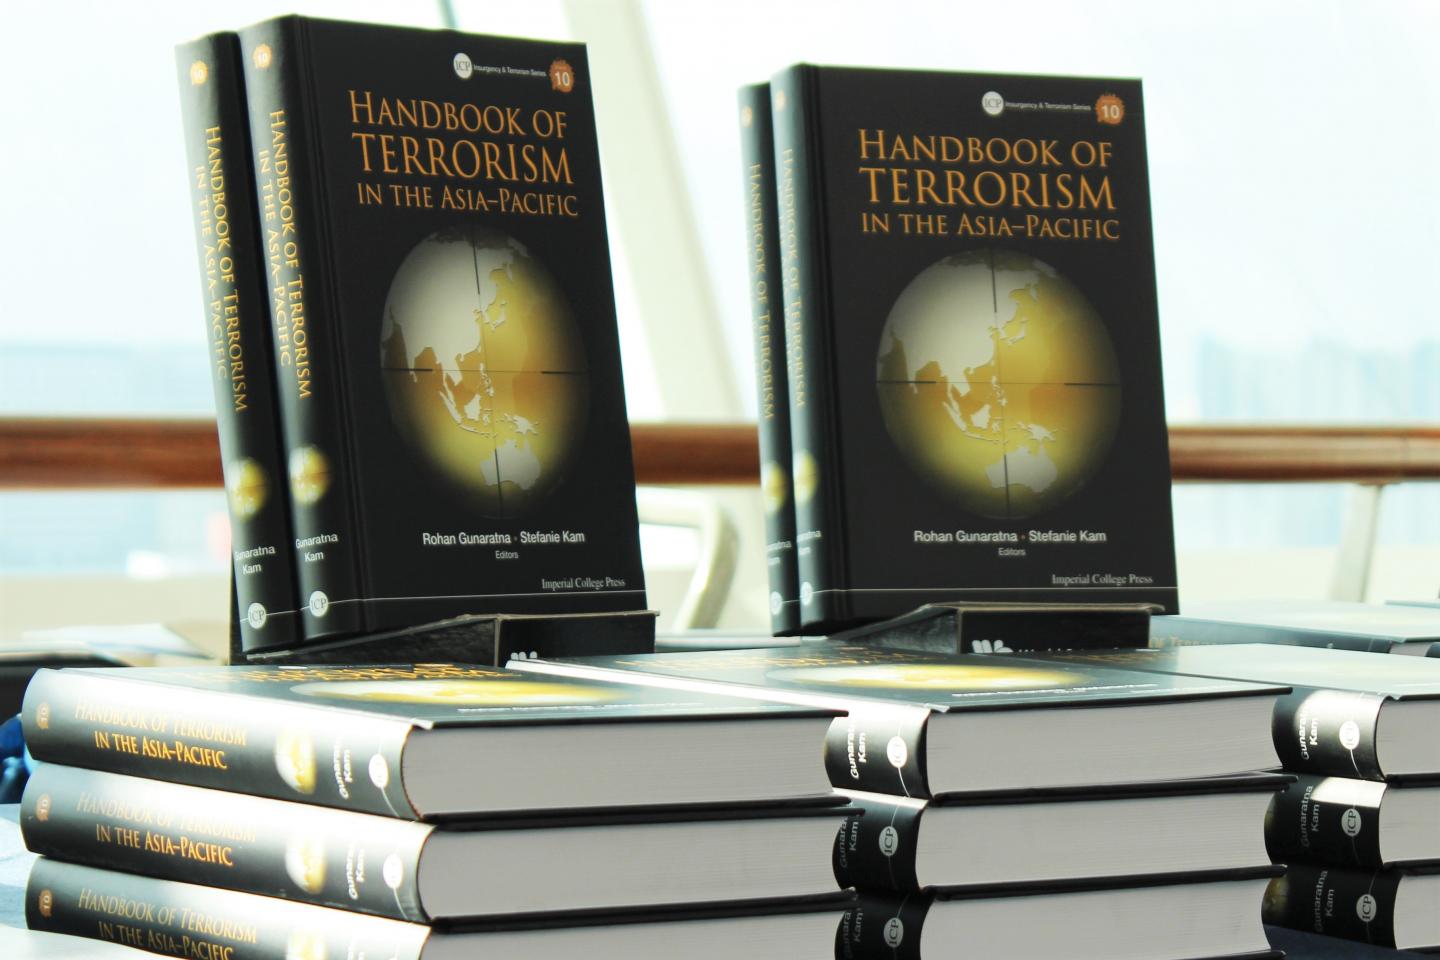 Copies of the Handbook of Terrorism in the Asia-Pacific